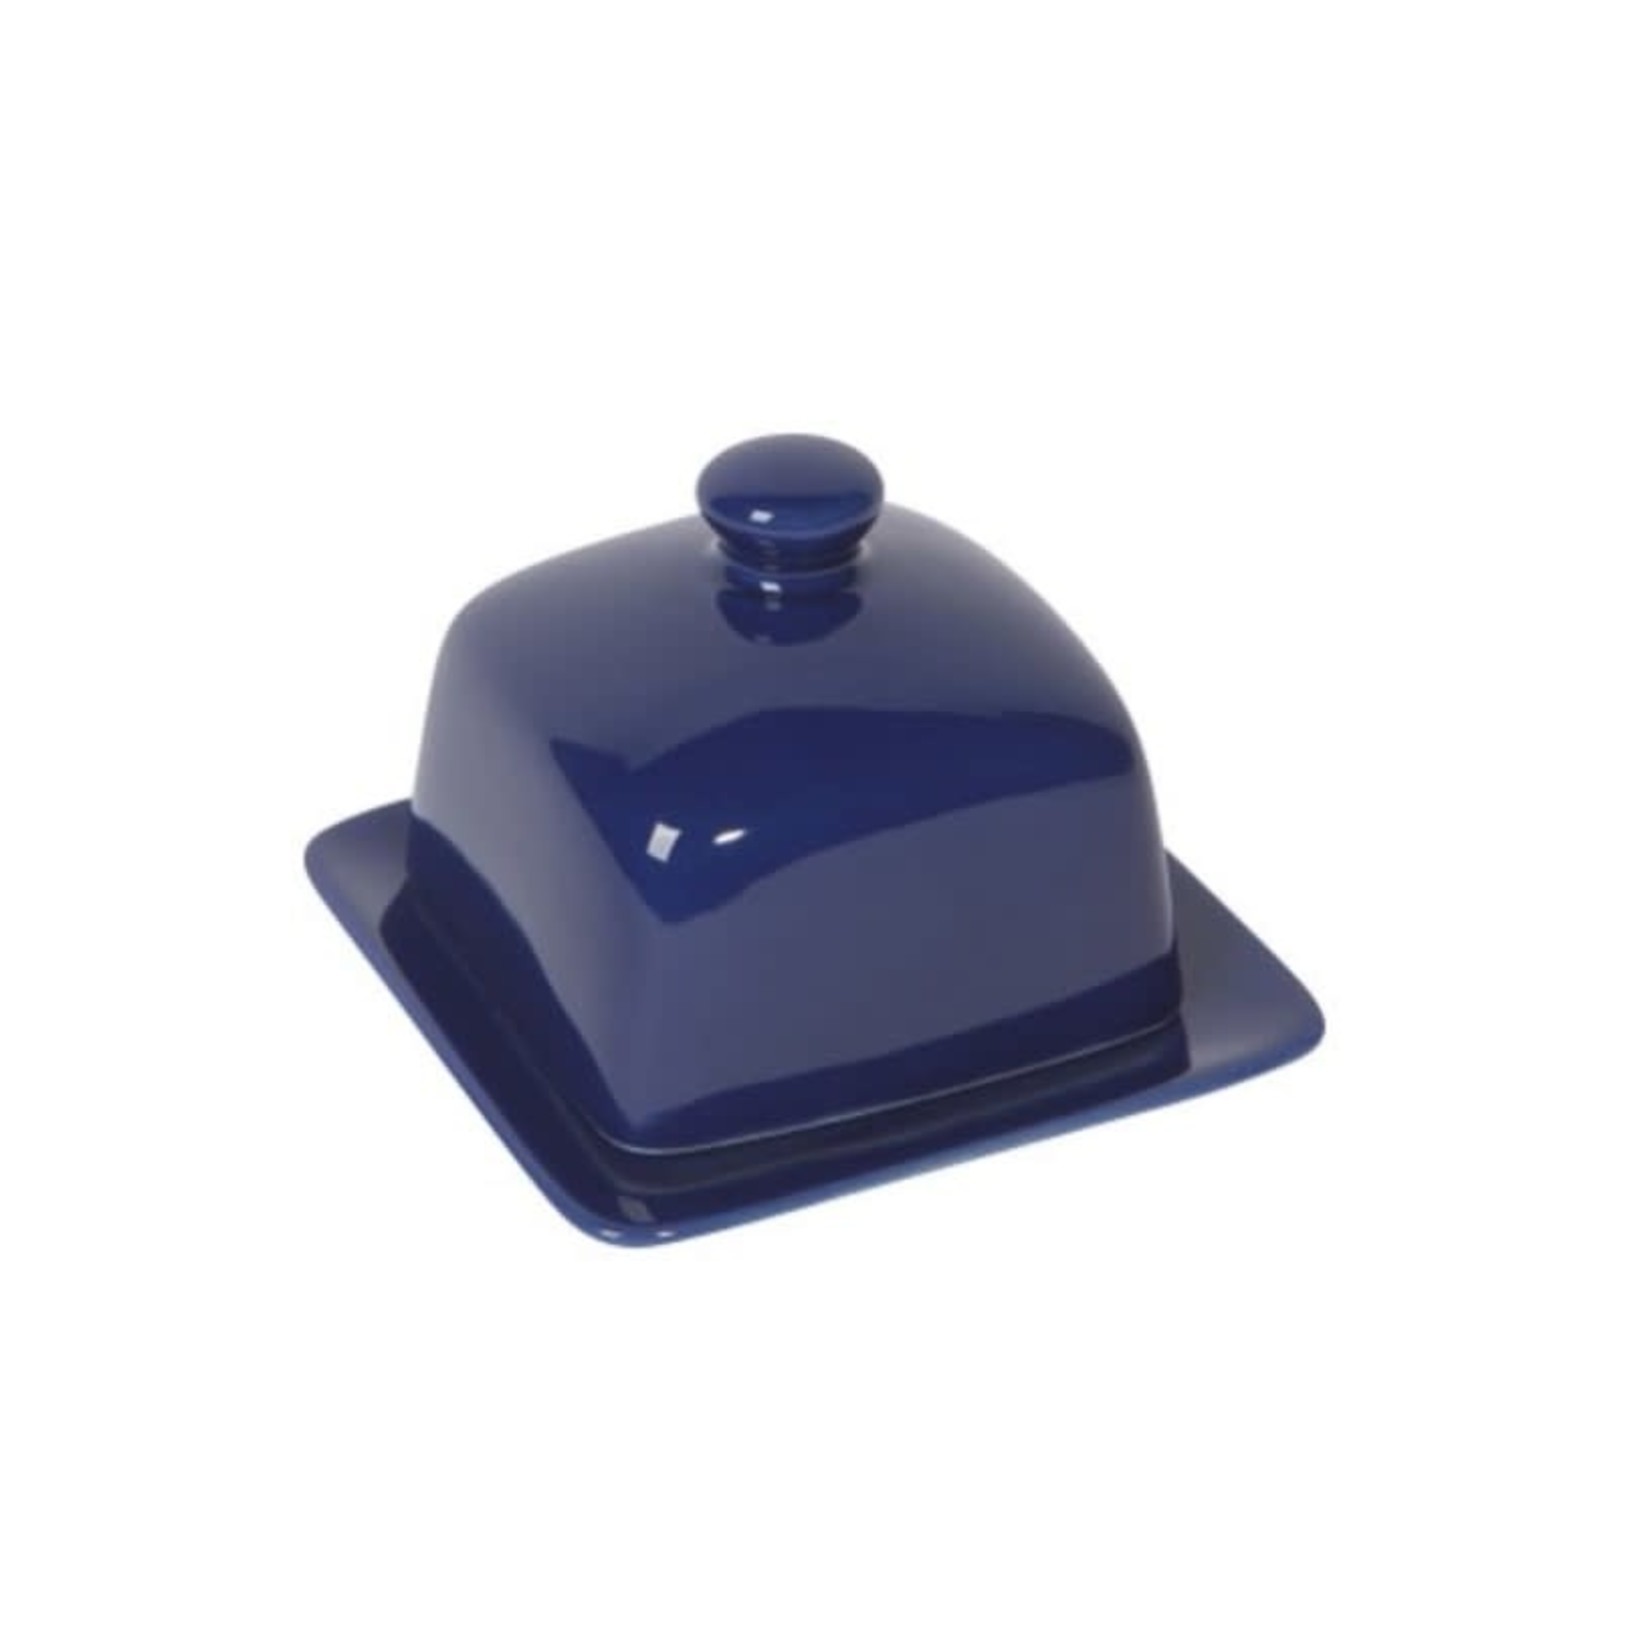 NOW DESIGNS NOW DESIGNS Square Butter Dish - Navy DISC